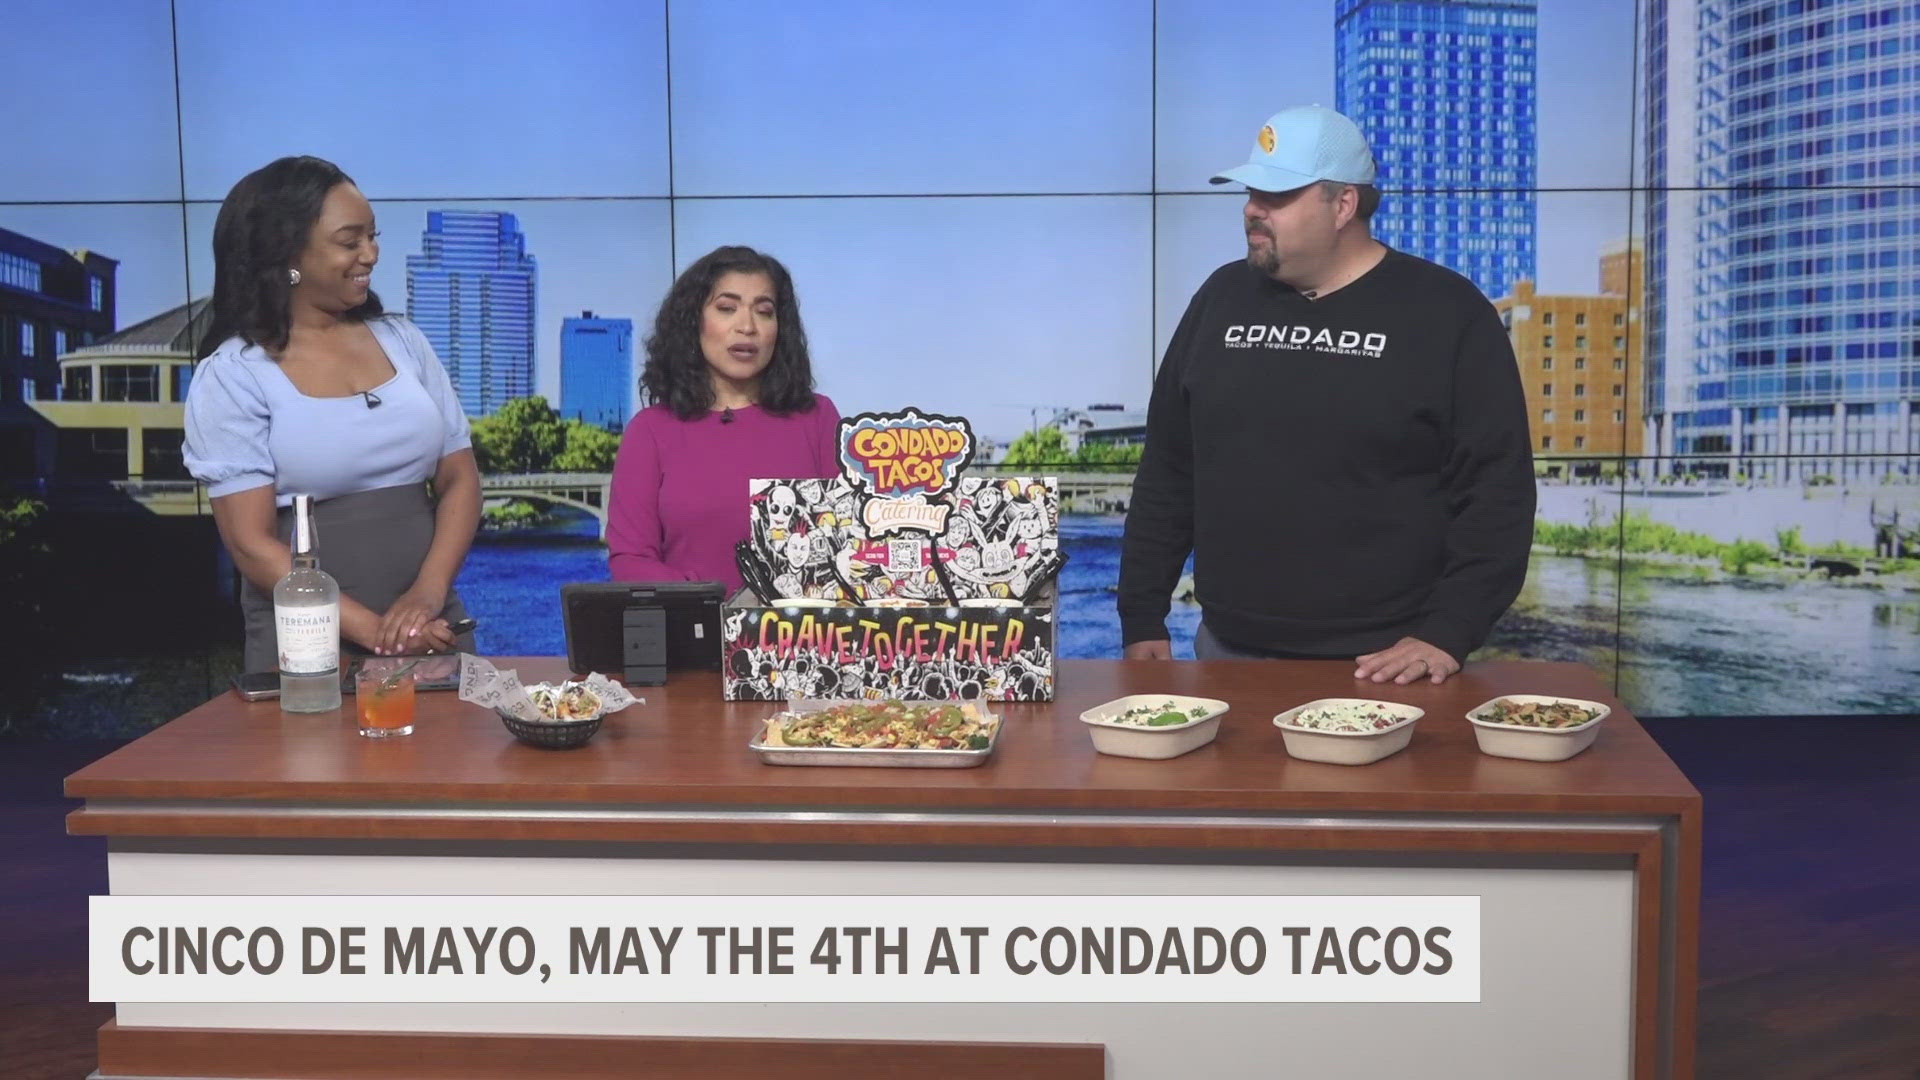 Condado Tacos will be offering special dishes to recognize Star Wars Day and Cinco de Mayo this weekend.